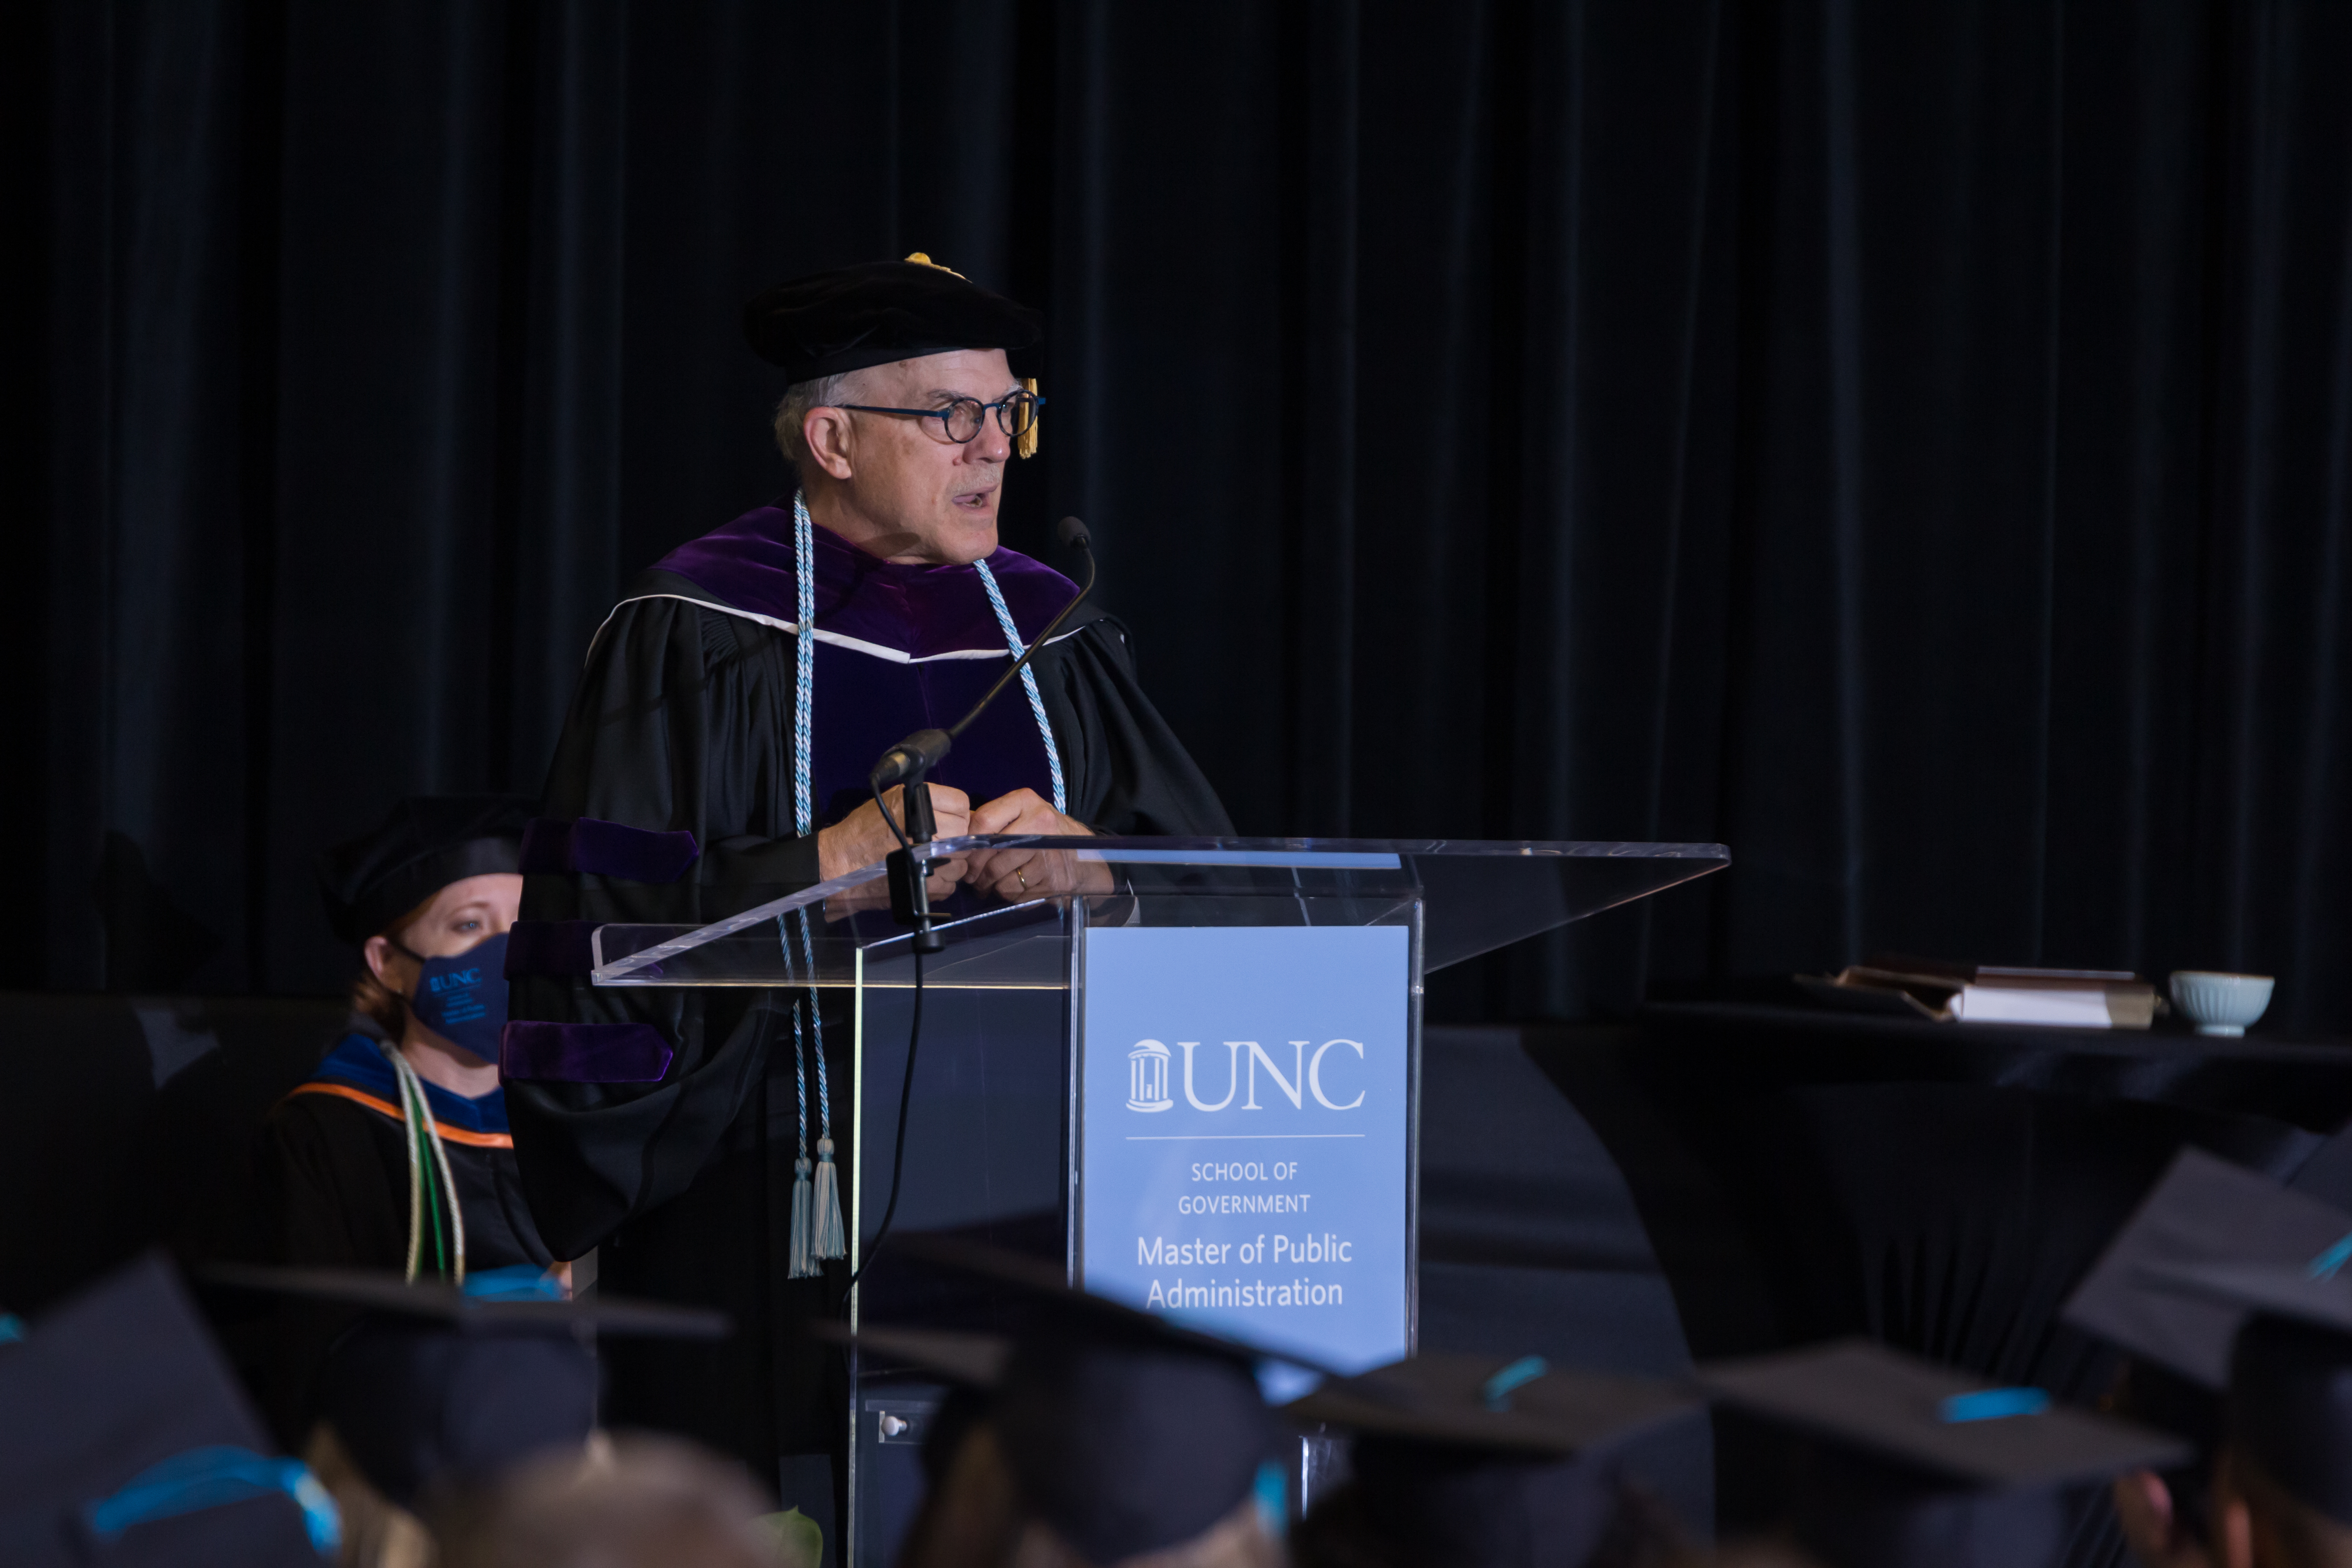 UNC MPA Dean Delivers Final Address at Spring Commencement 